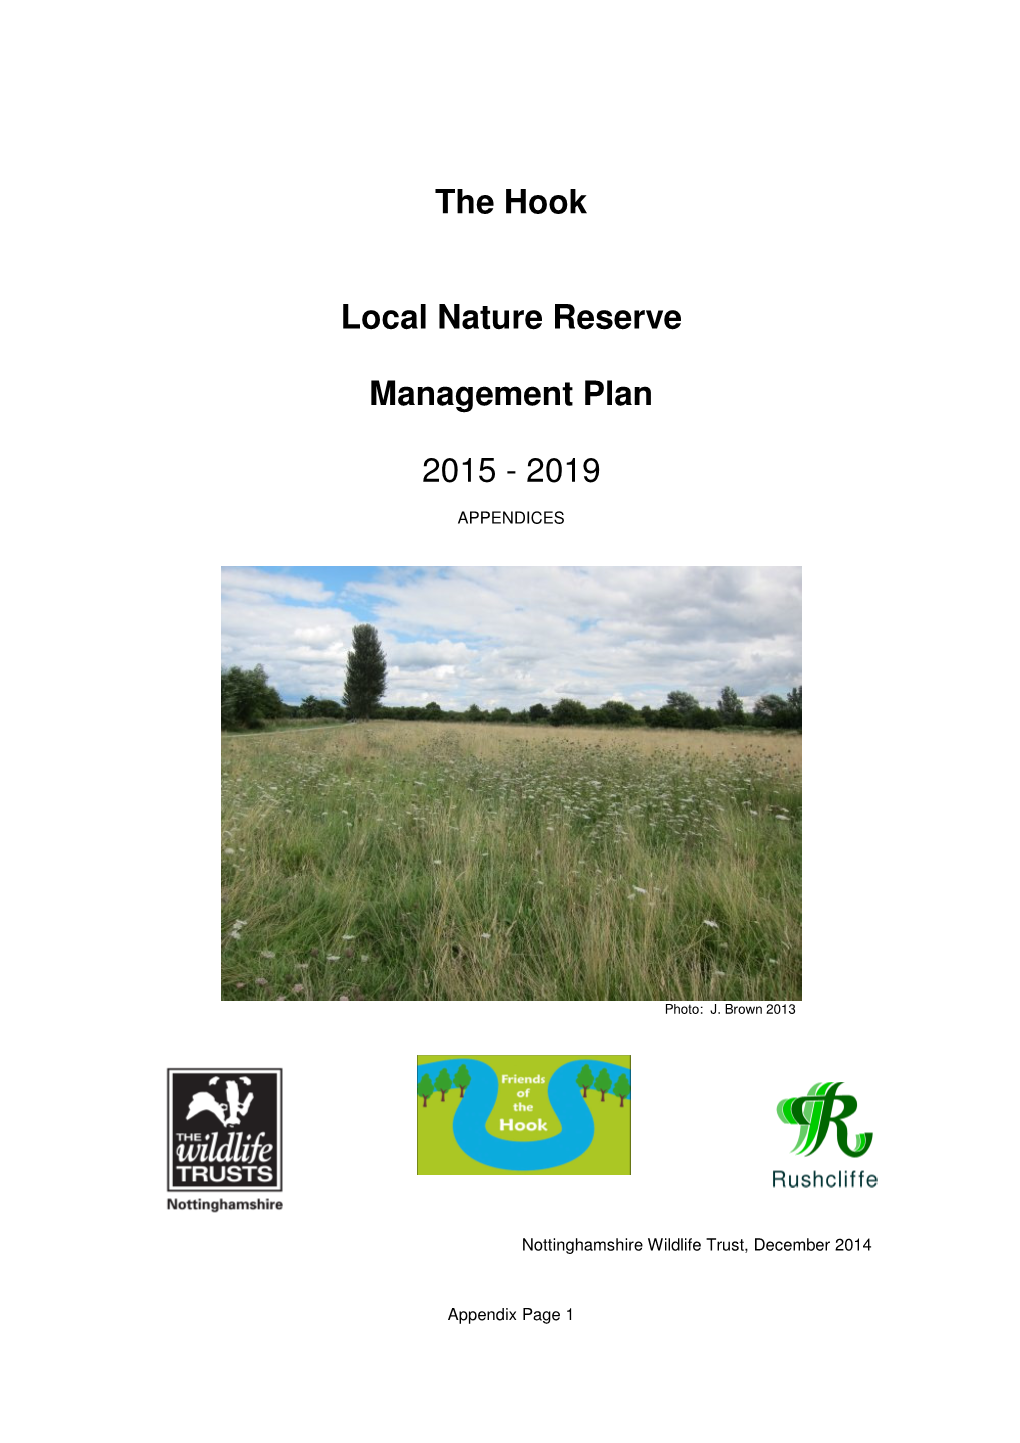 The Hook Local Nature Reserve Management Plan 2015